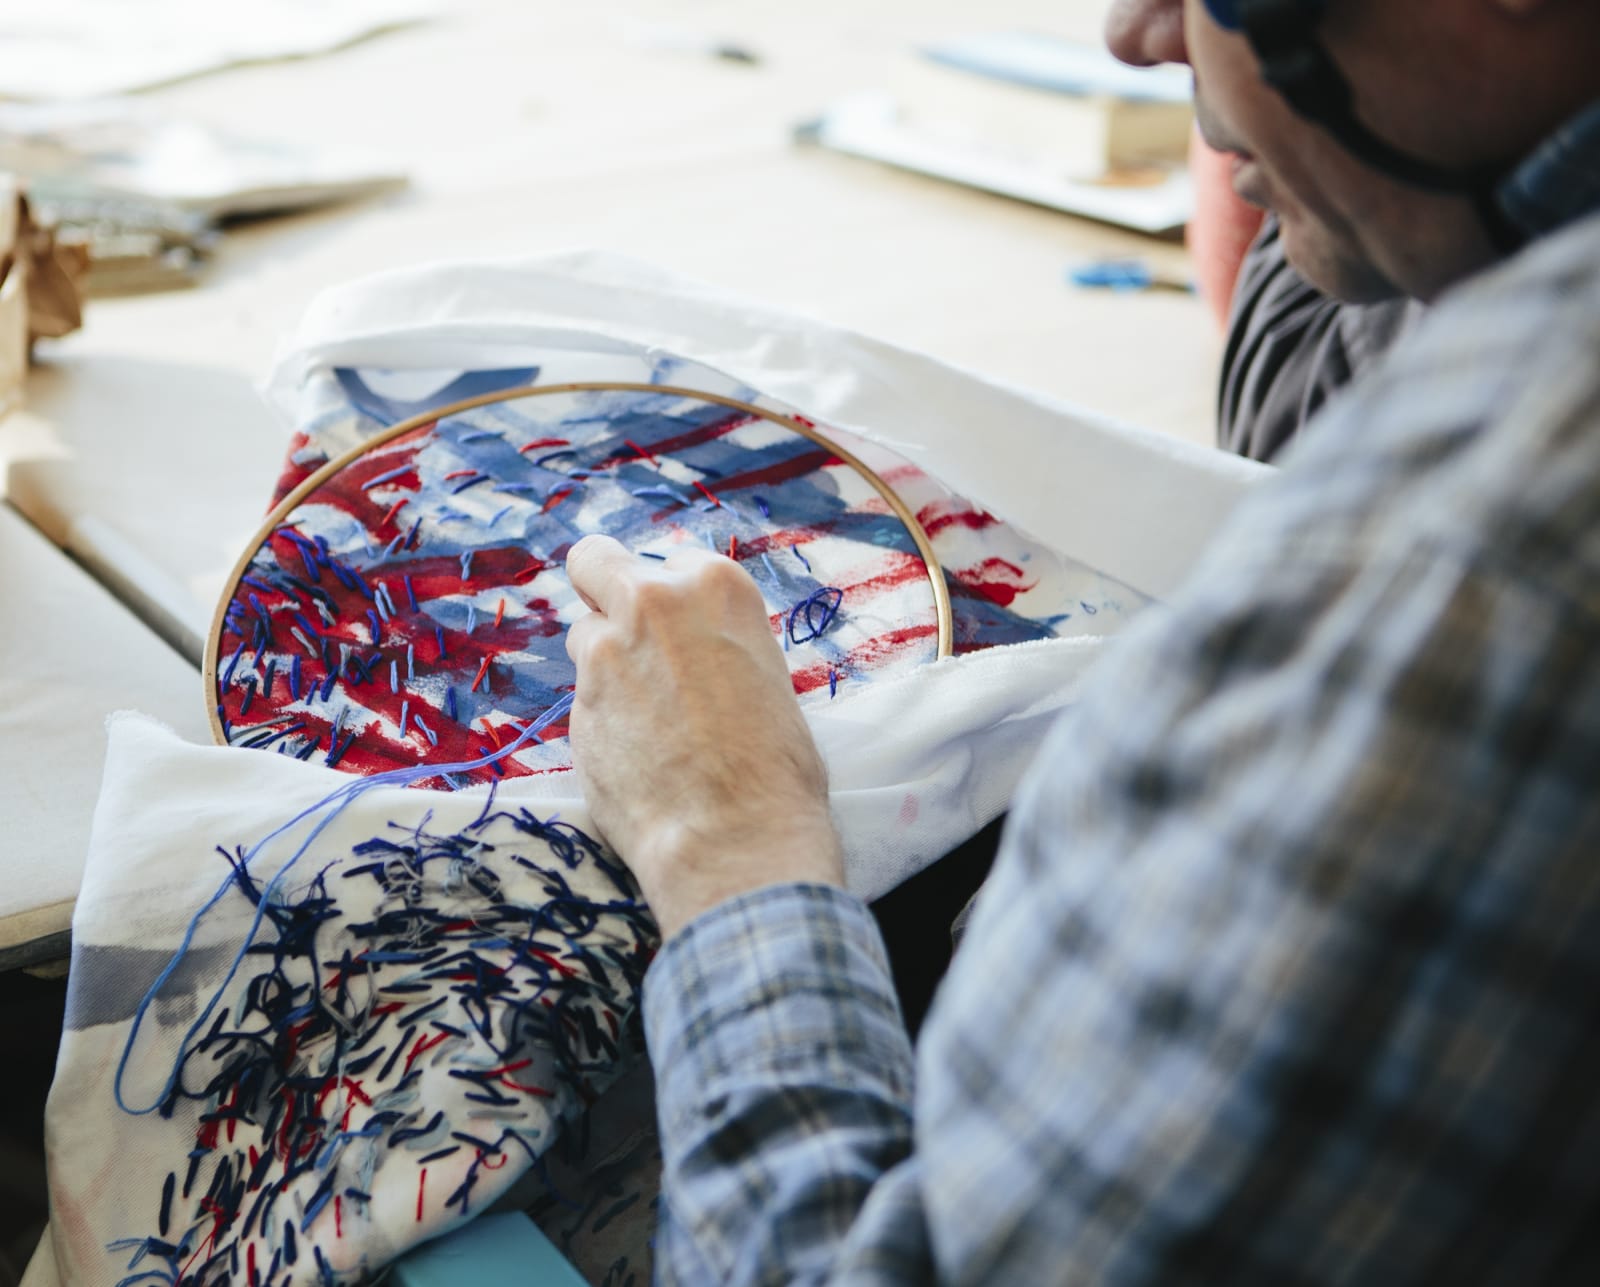 Dan Miller embroidering a textile painting (Photo by Diana Rothery)